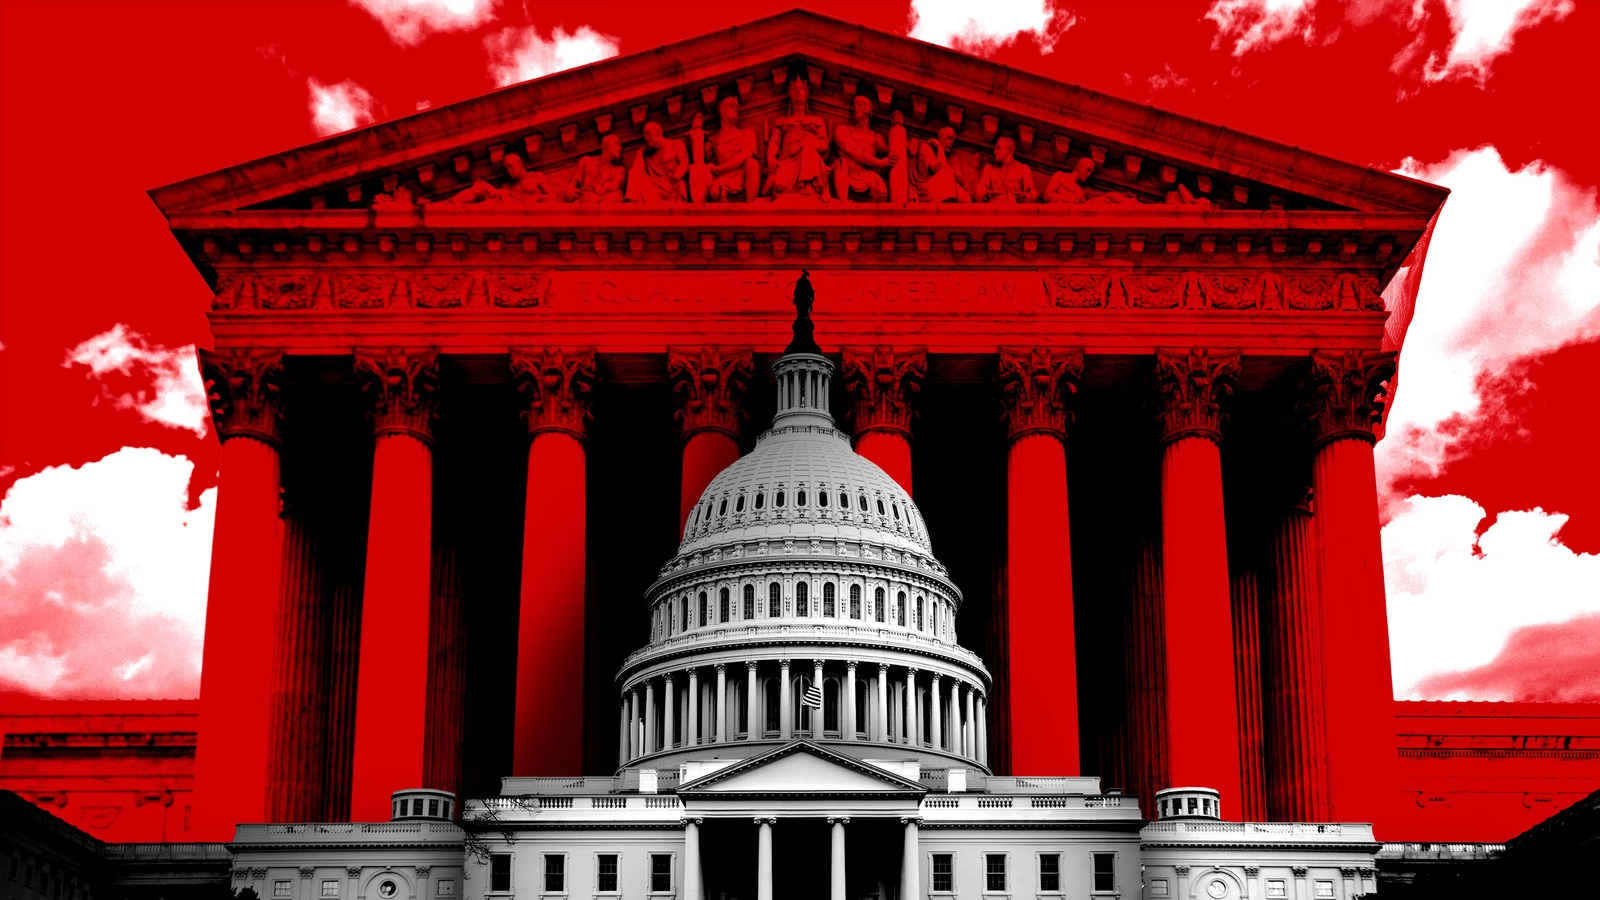 A Conservative Supreme Court In Turmoil. The Case for Term Limits & Why